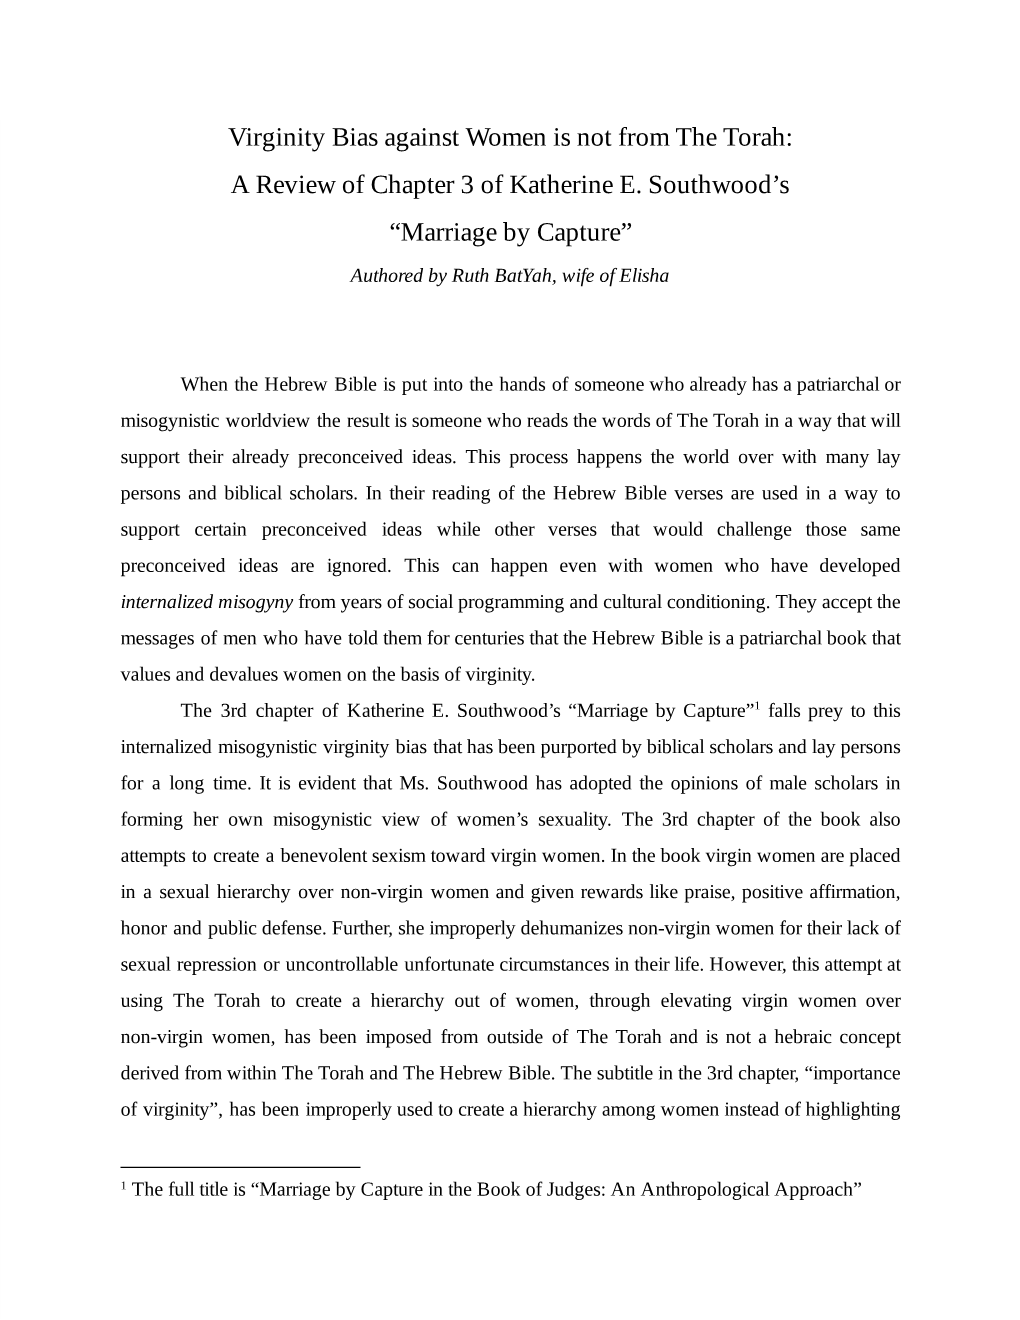 Virginity Bias Against Women Is Not from the Torah: a Review of Chapter 3 of Katherine E